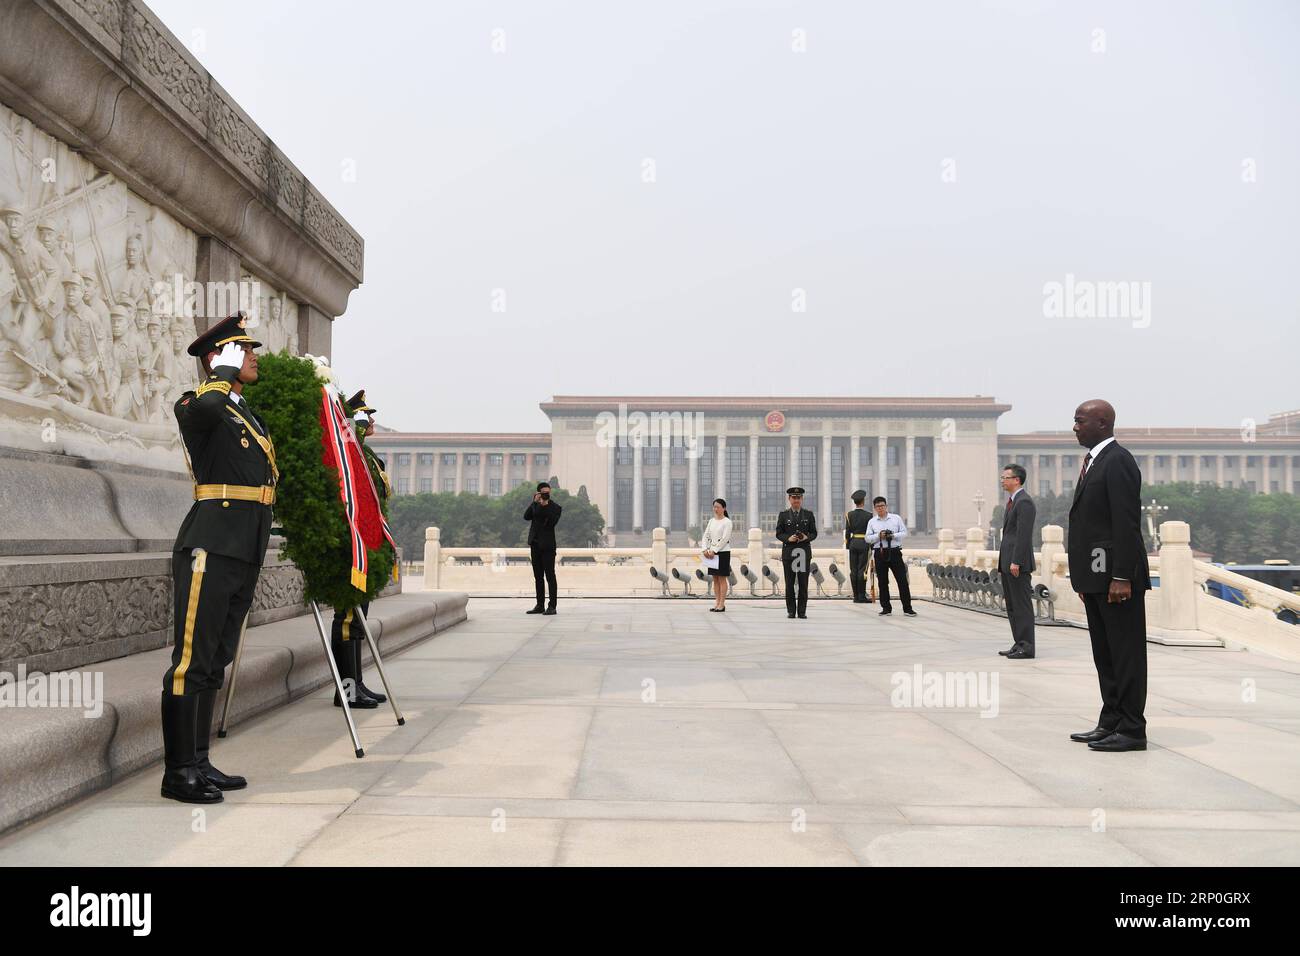 (180514) -- BEIJING, May 14, 2018 -- Prime Minister Keith Rowley of Trinidad and Tobago lays a wreath to the Monument to the People s Heroes at the Tian anmen Square in Beijing, capital of China, May 14, 2018. )(mcg) CHINA-BEIJING-KEITH ROWLEY-MONUMENT-TRIBUTE (CN) ChenxYehua PUBLICATIONxNOTxINxCHN Stock Photo